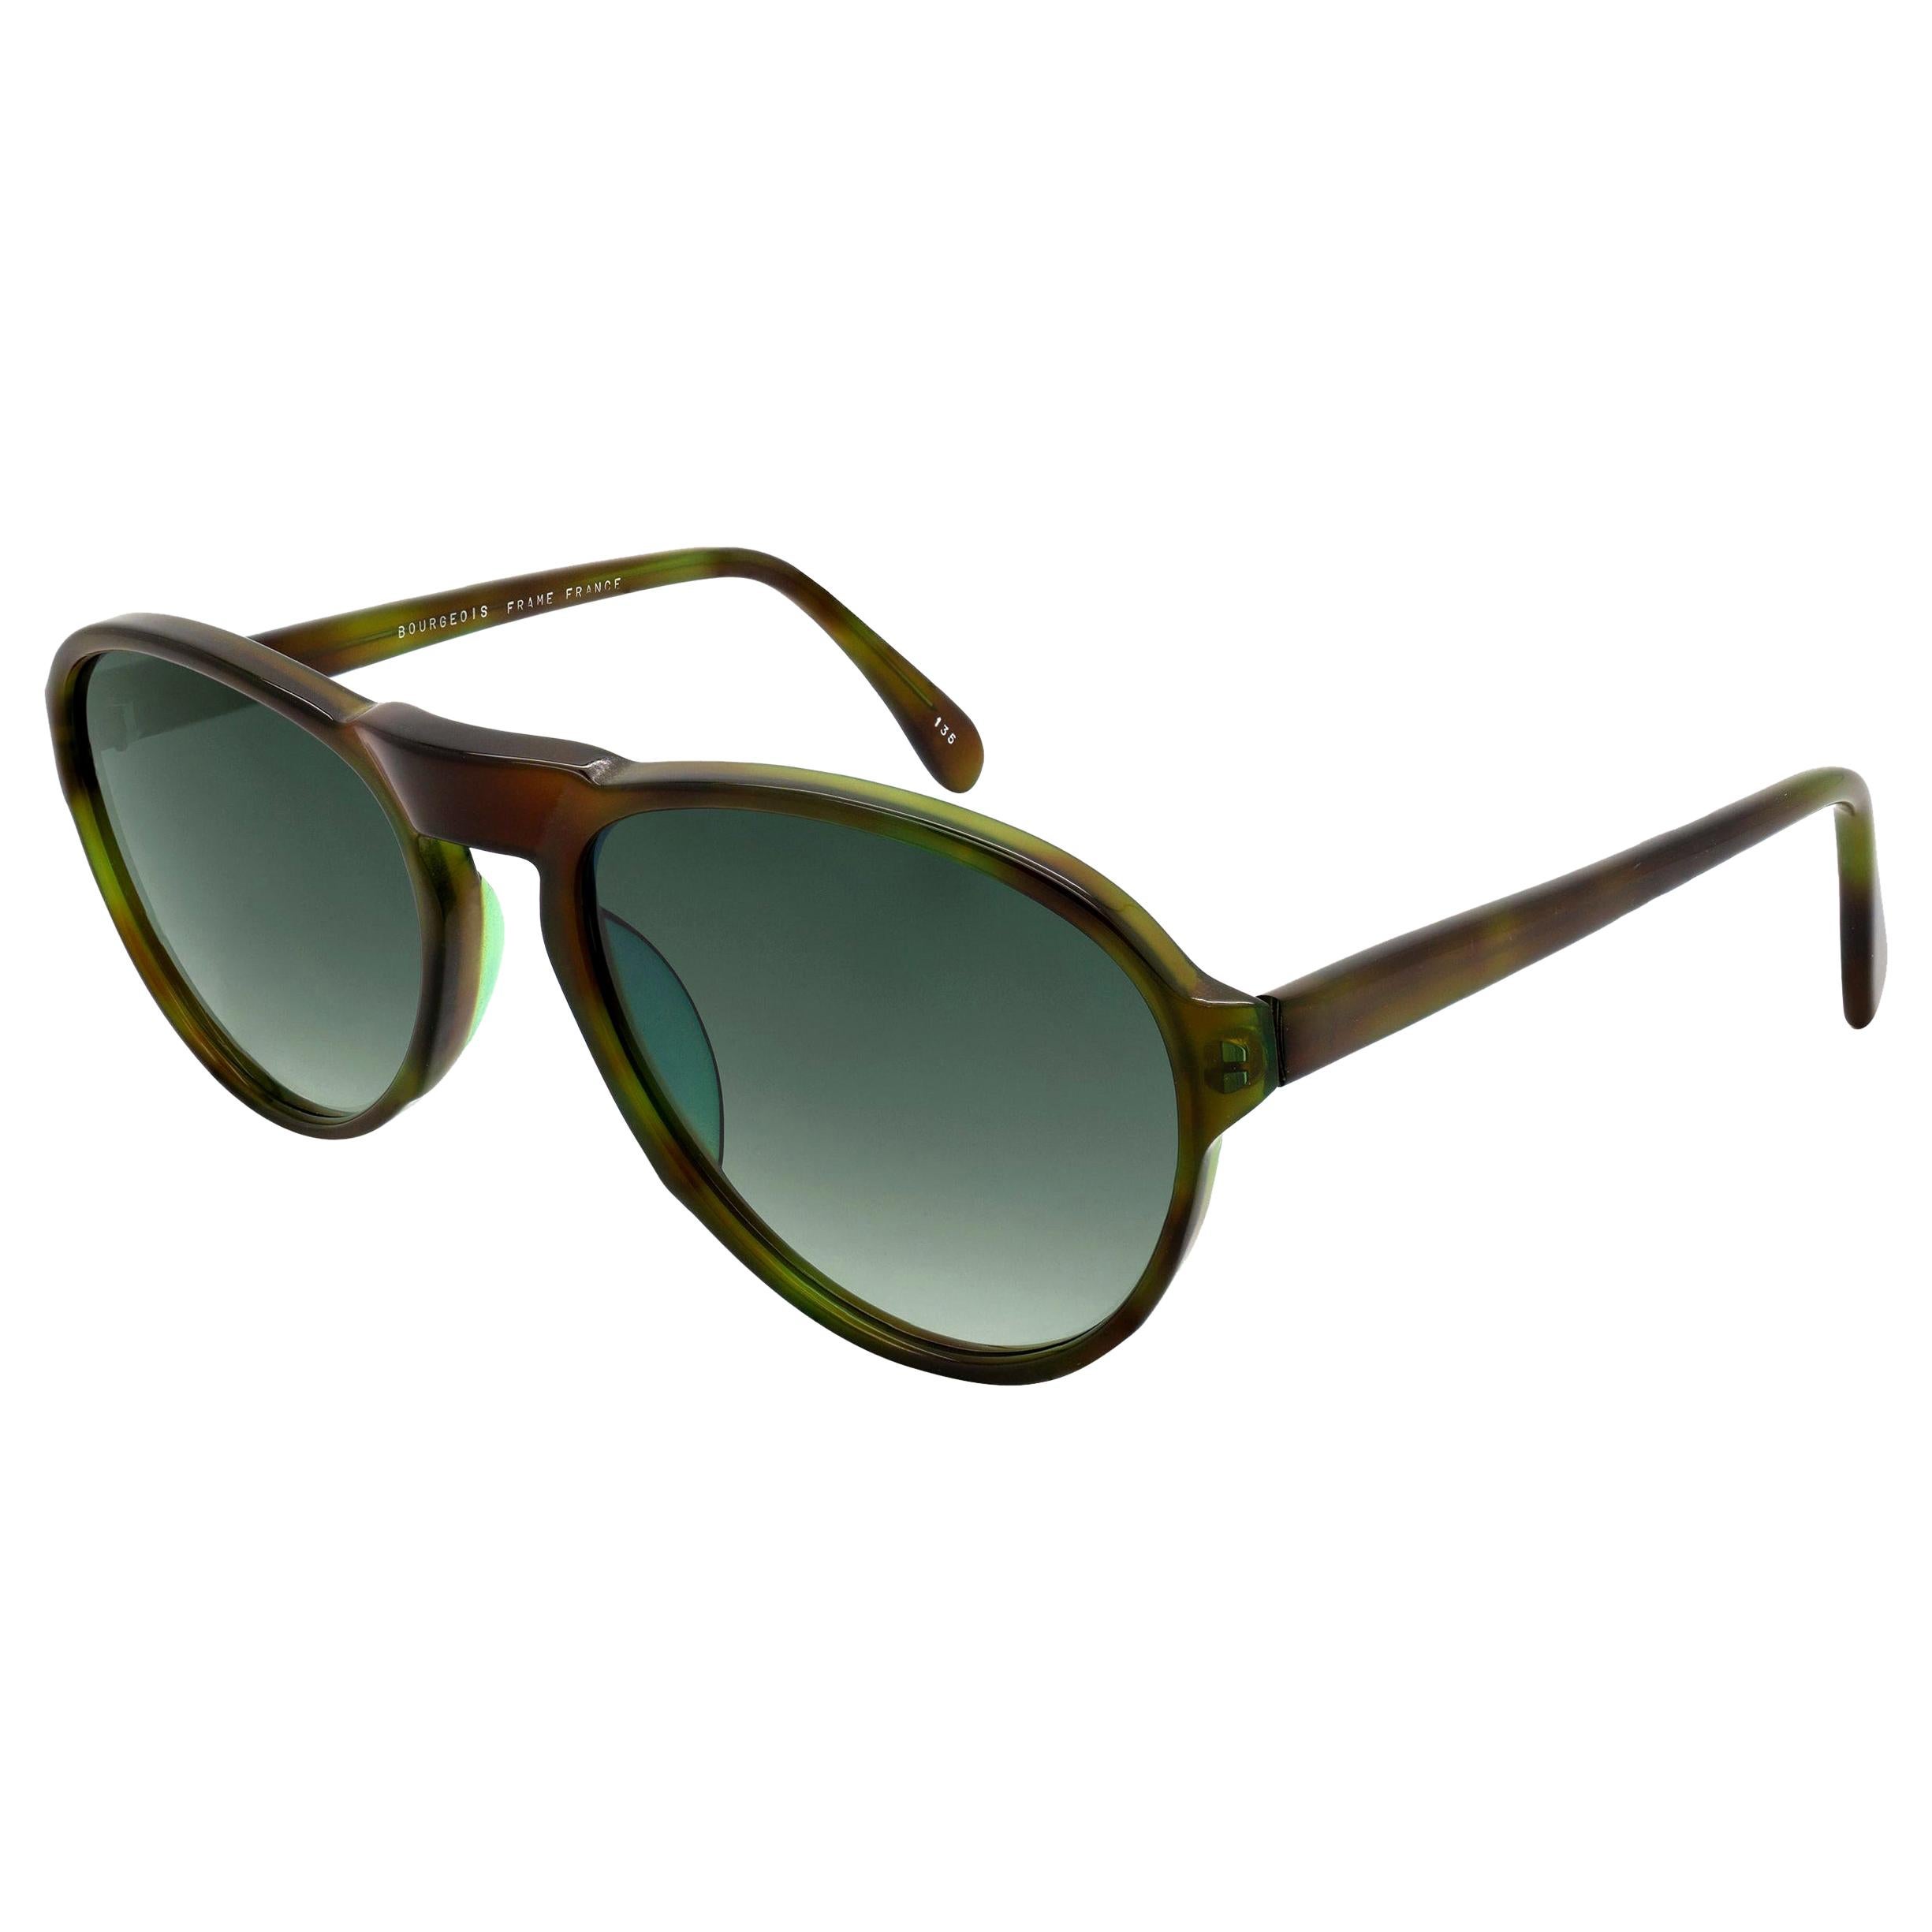 Bourgeois sunglasses green pilot, FRANCE For Sale